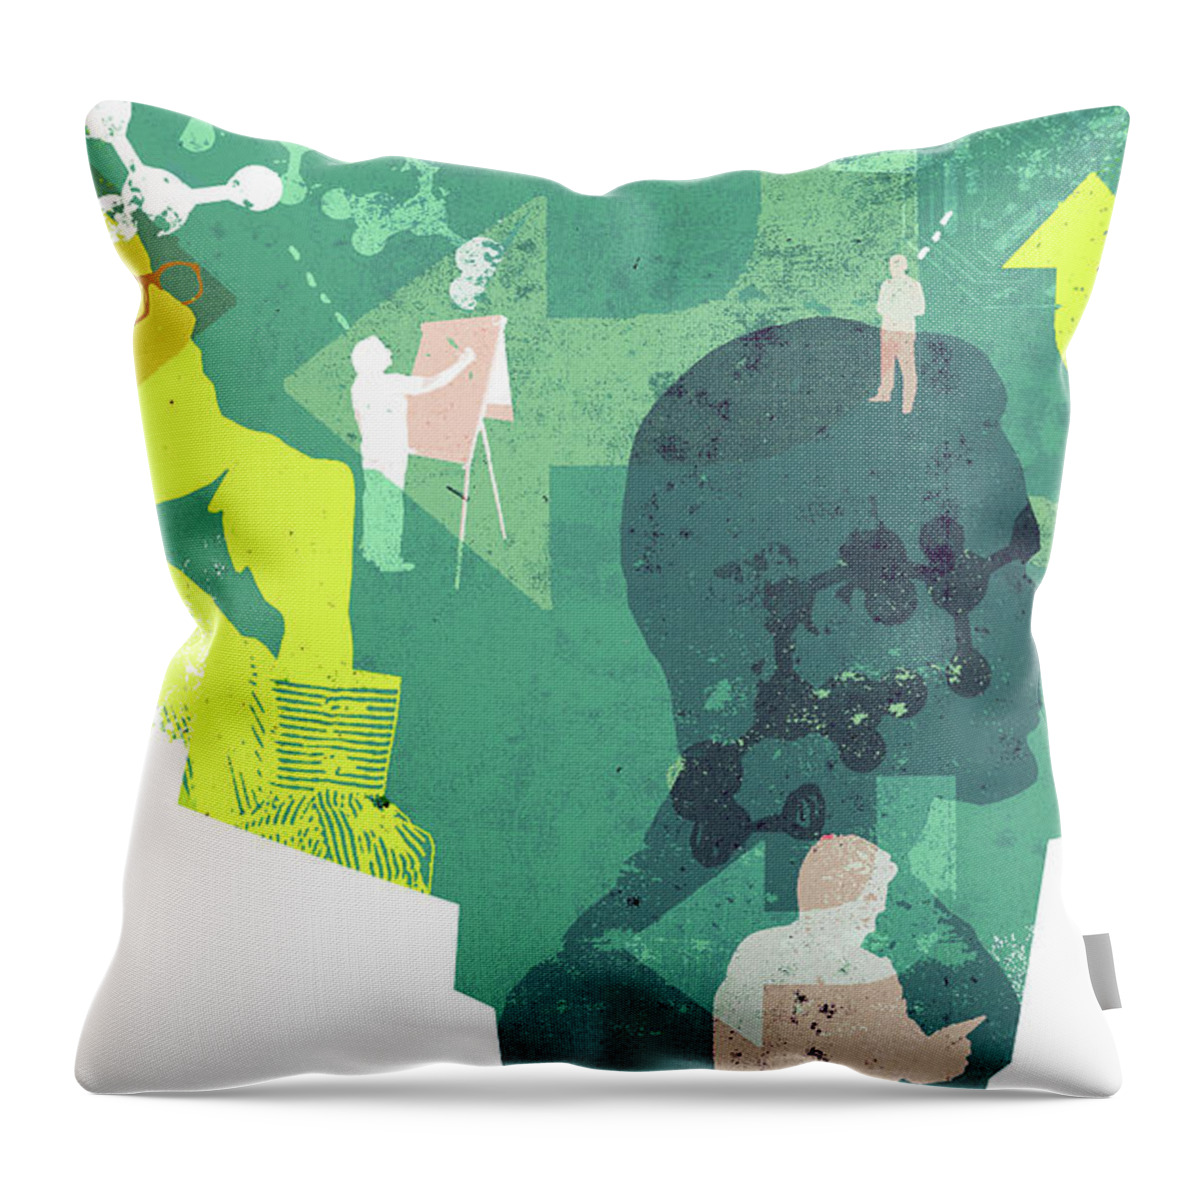 Access Throw Pillow featuring the photograph Men Connected By Arrows, Circuit Board by Ikon Ikon Images